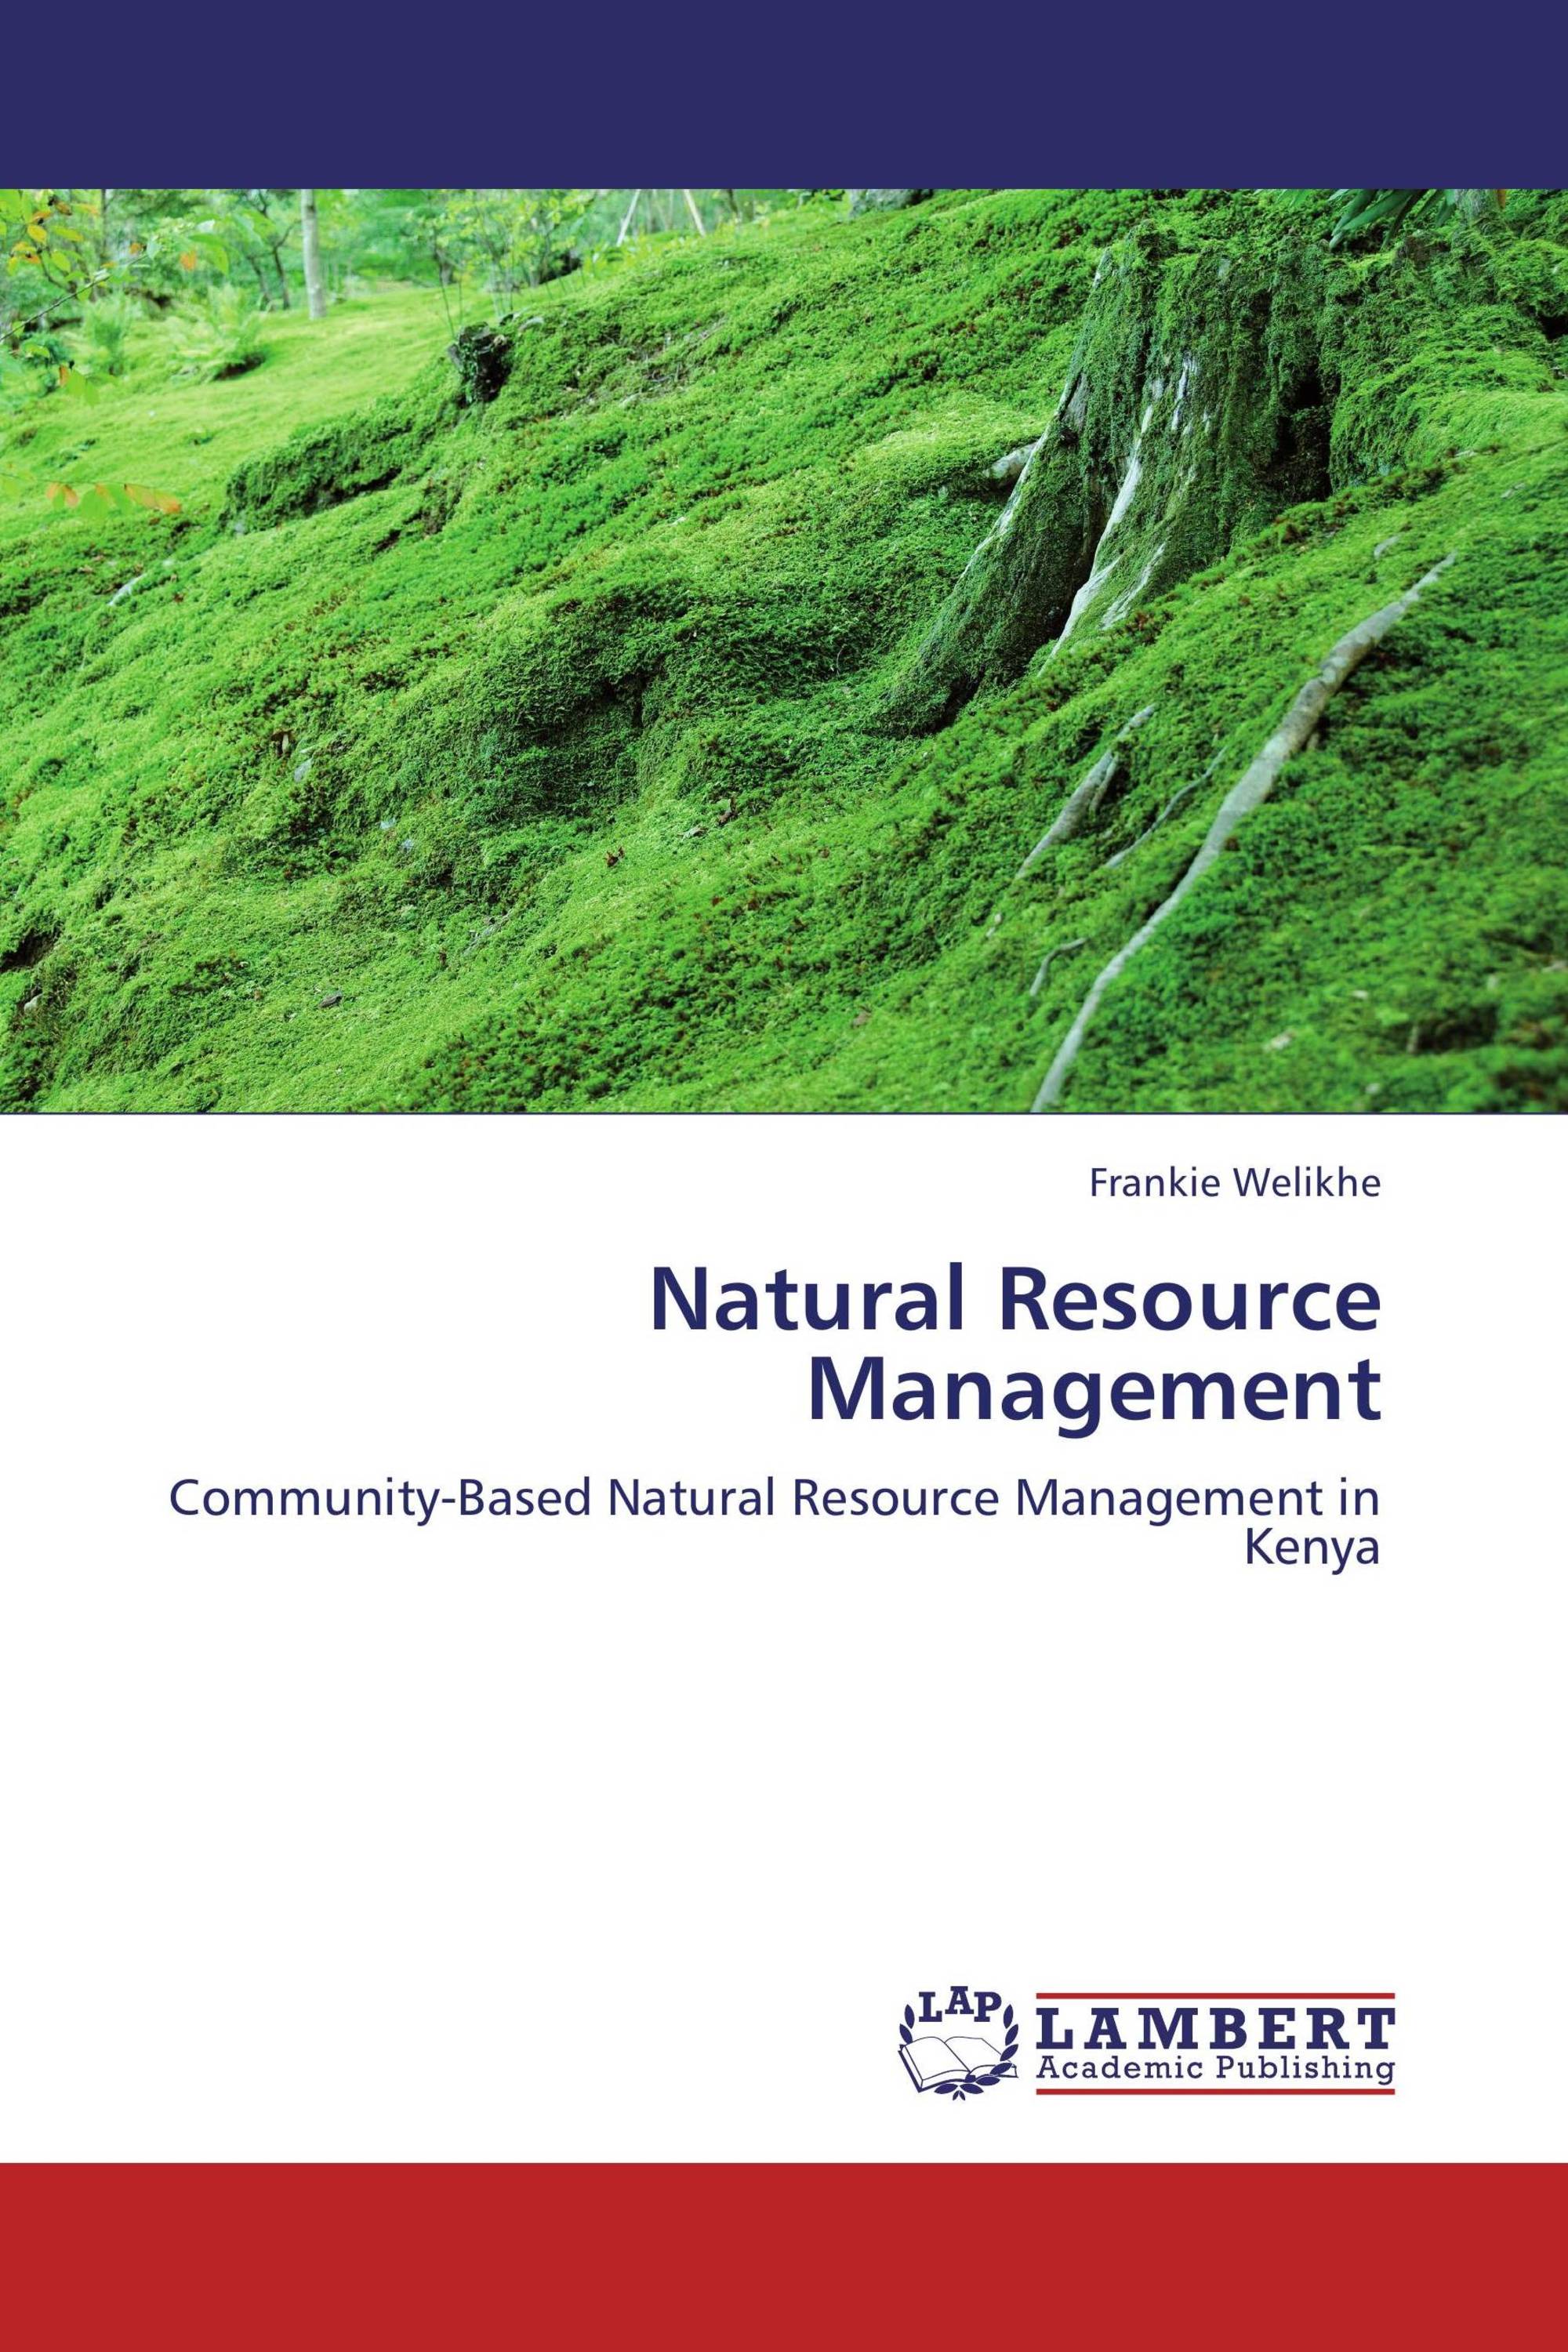 natural resource management research articles